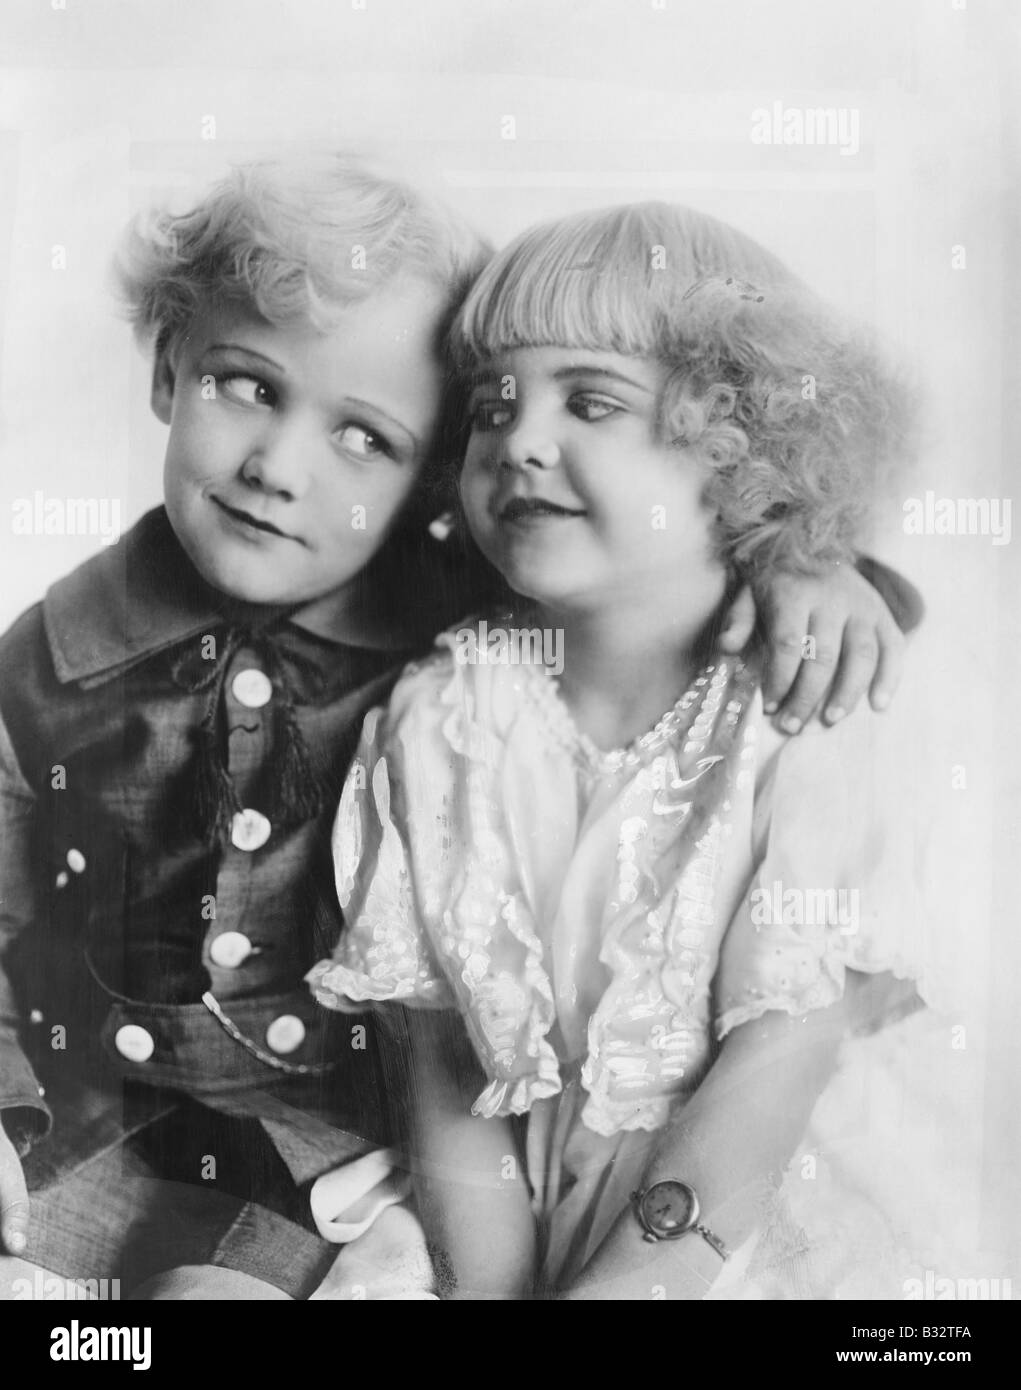 Portrait of a boy and girl with arm around her Stock Photo